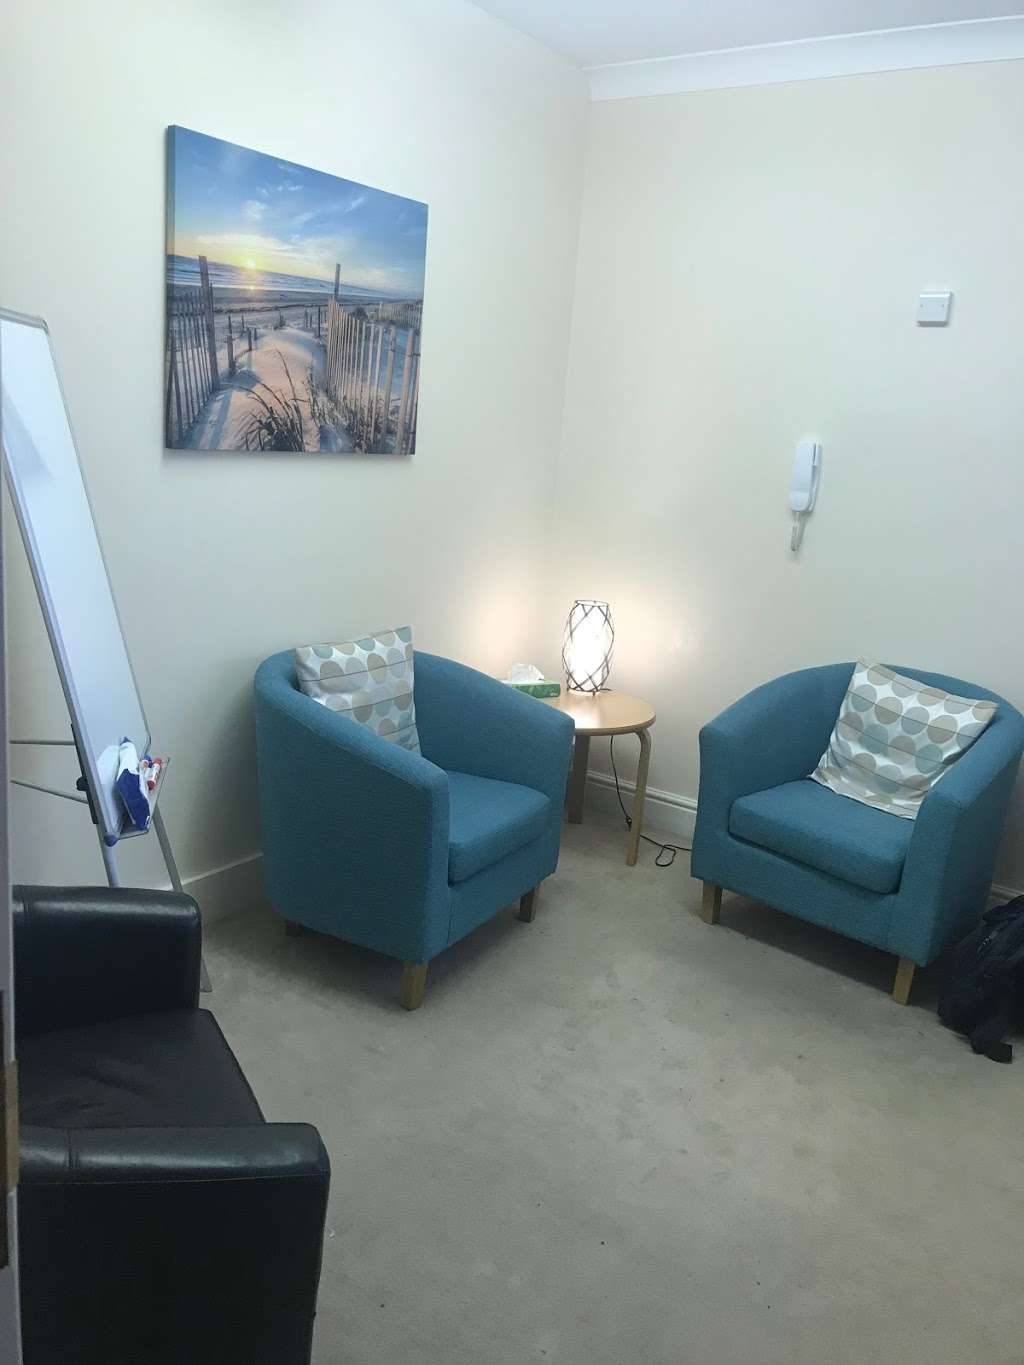 Mind & Mood - CBT Psychotherapy, EMDR & Couple Counselling | SUNDANCE HOUSE, 131-133 Roman Road, Mountnessing, Mountnessing, Brentwood, Essex CM15 0UD, UK | Phone: 01277 424911